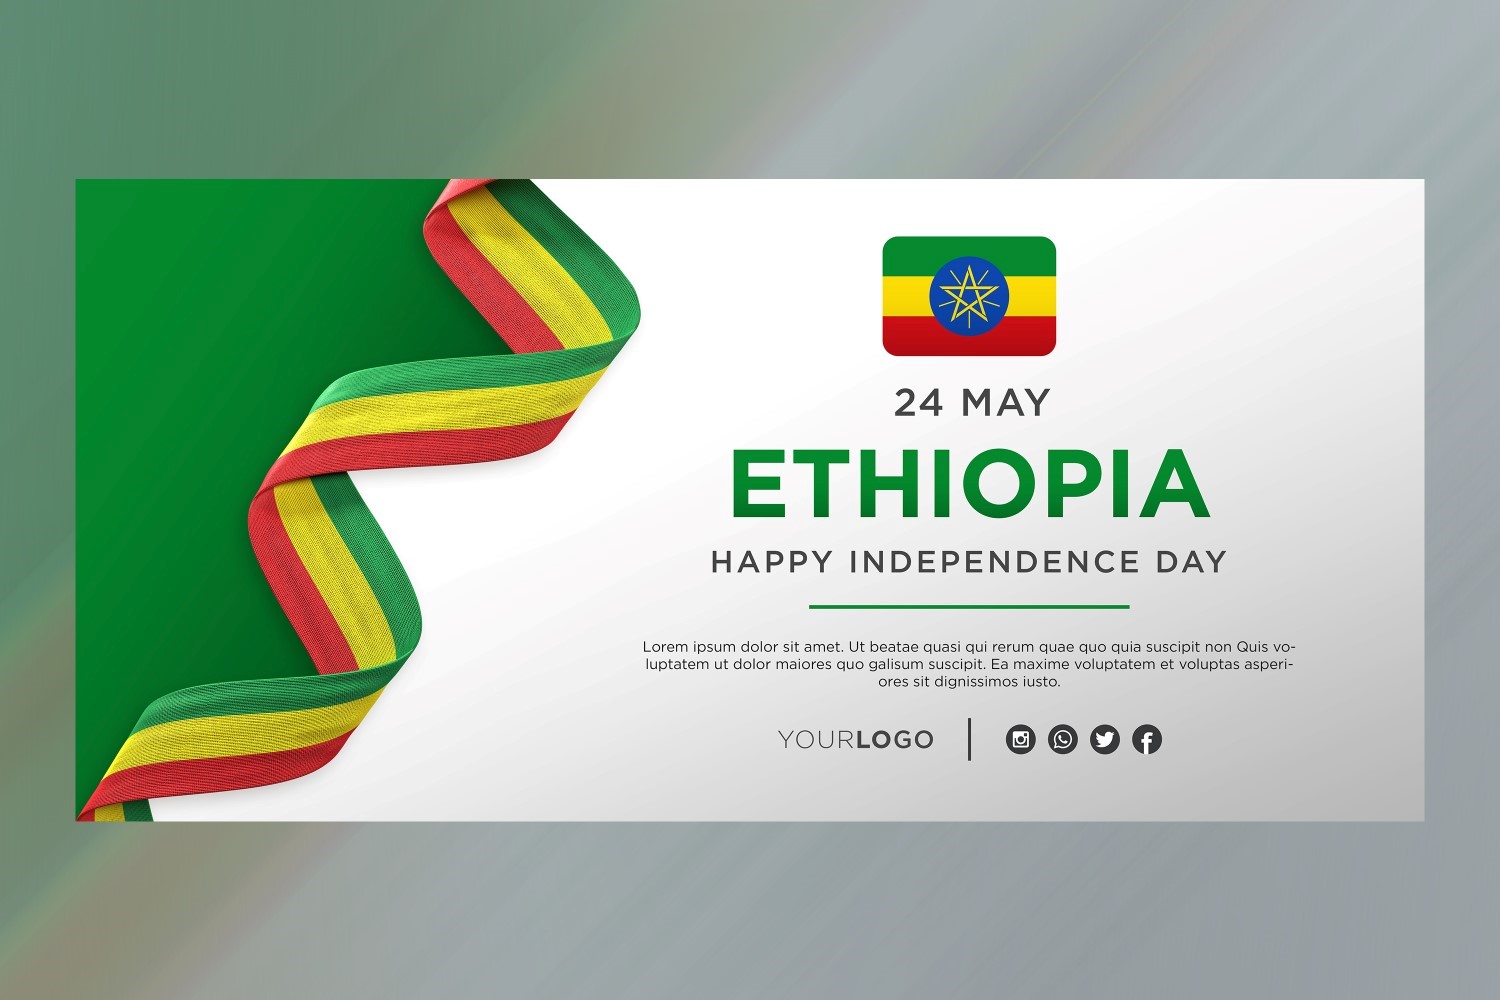 Ethiopia National Independence Day Celebration Banner, National Anniversary